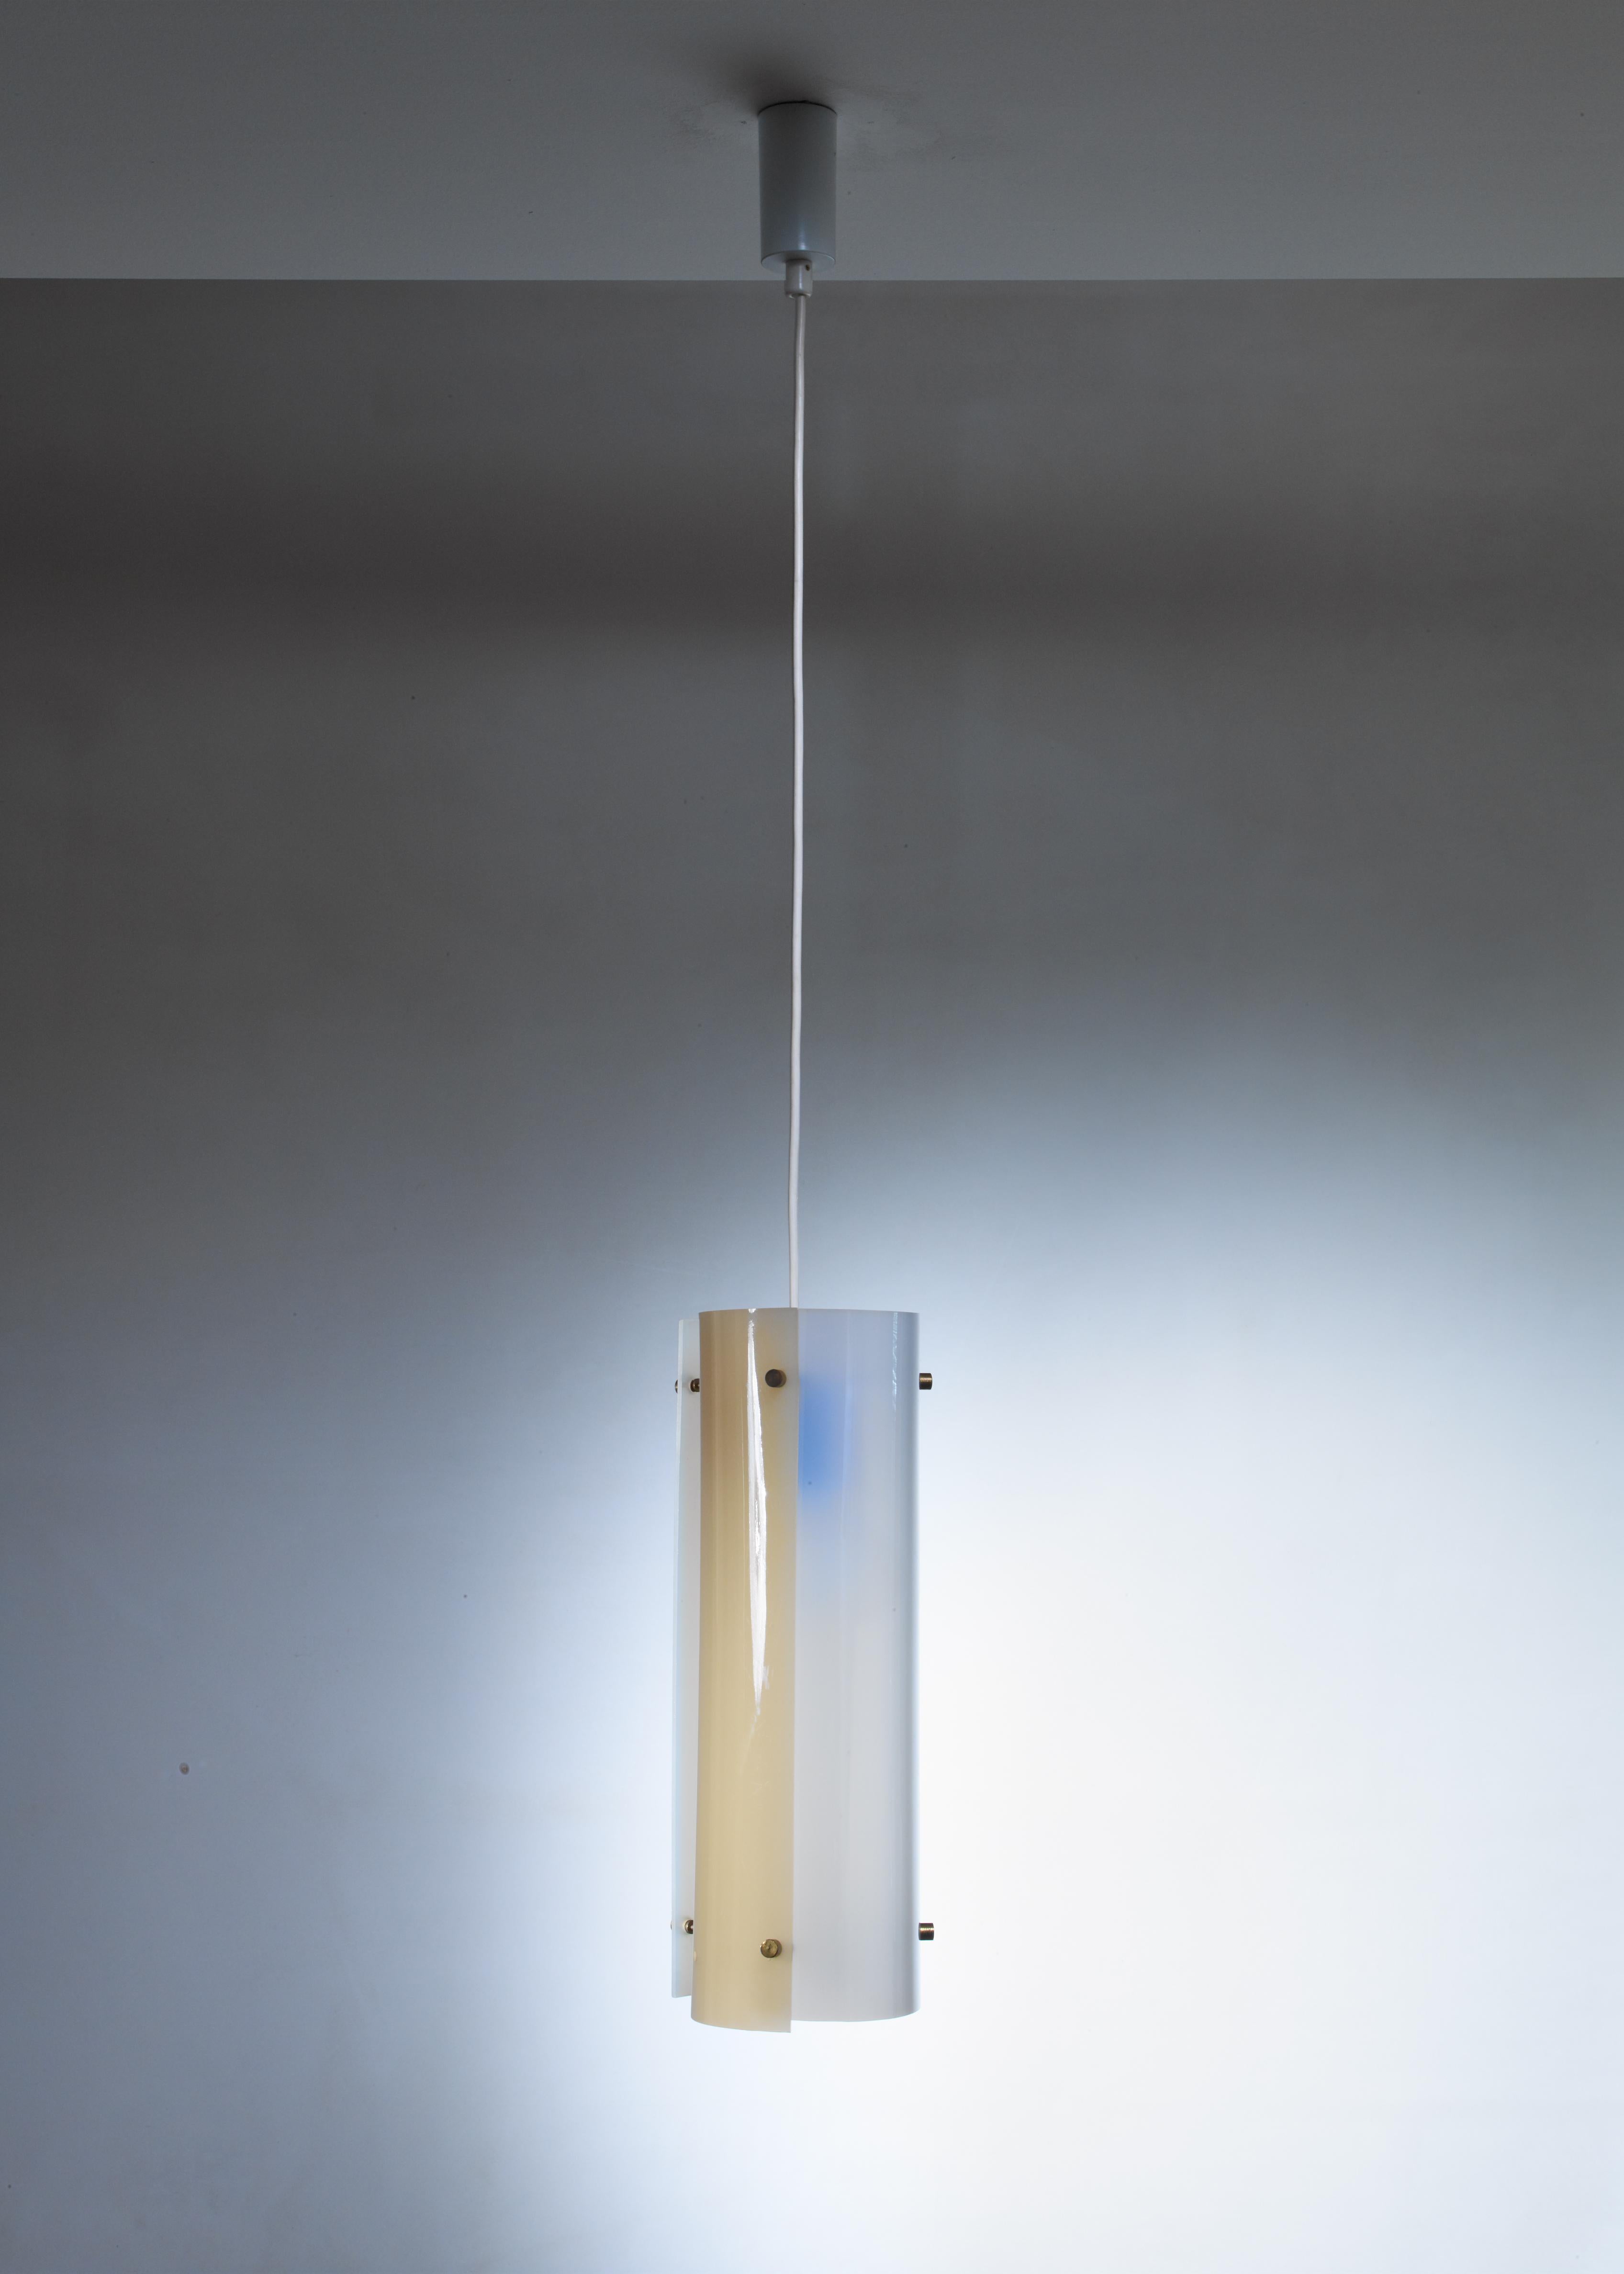 A Yki Nummi model 64-430 pendant lamp for Orno, made of three curved white and soft yellow plexiglass elements, held together by thin brass rods. The colored plexiglass creates a beautiful, atmospheric light distribution.